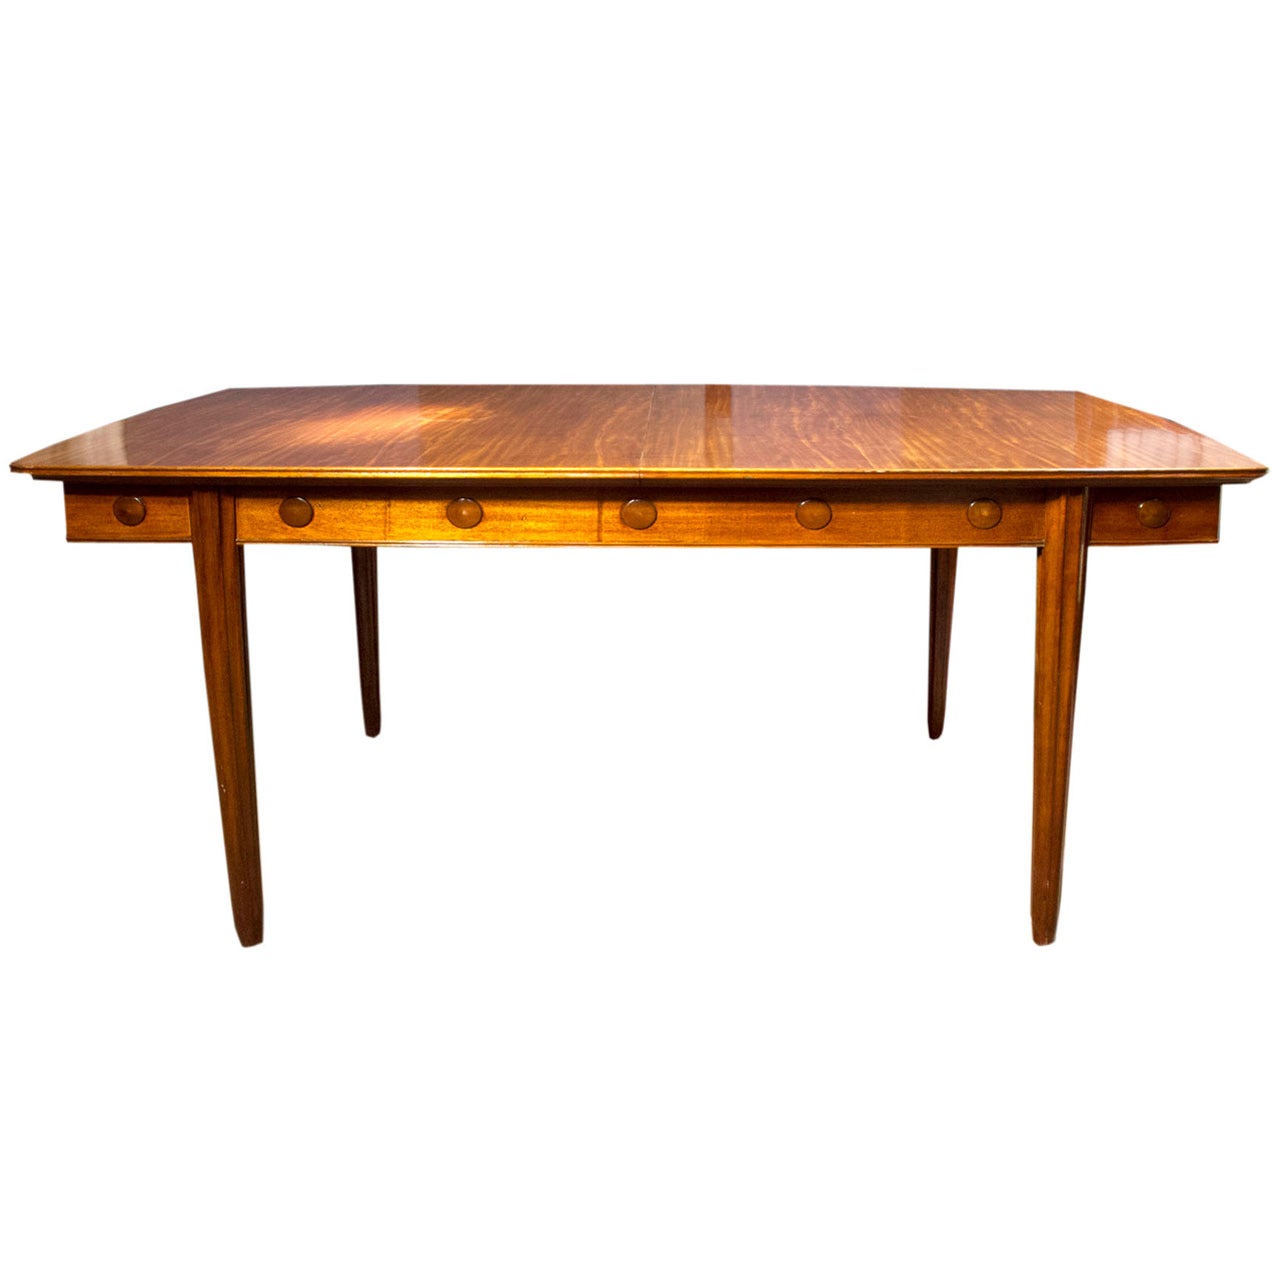 Gordon Russell Dining Table circa 1950's